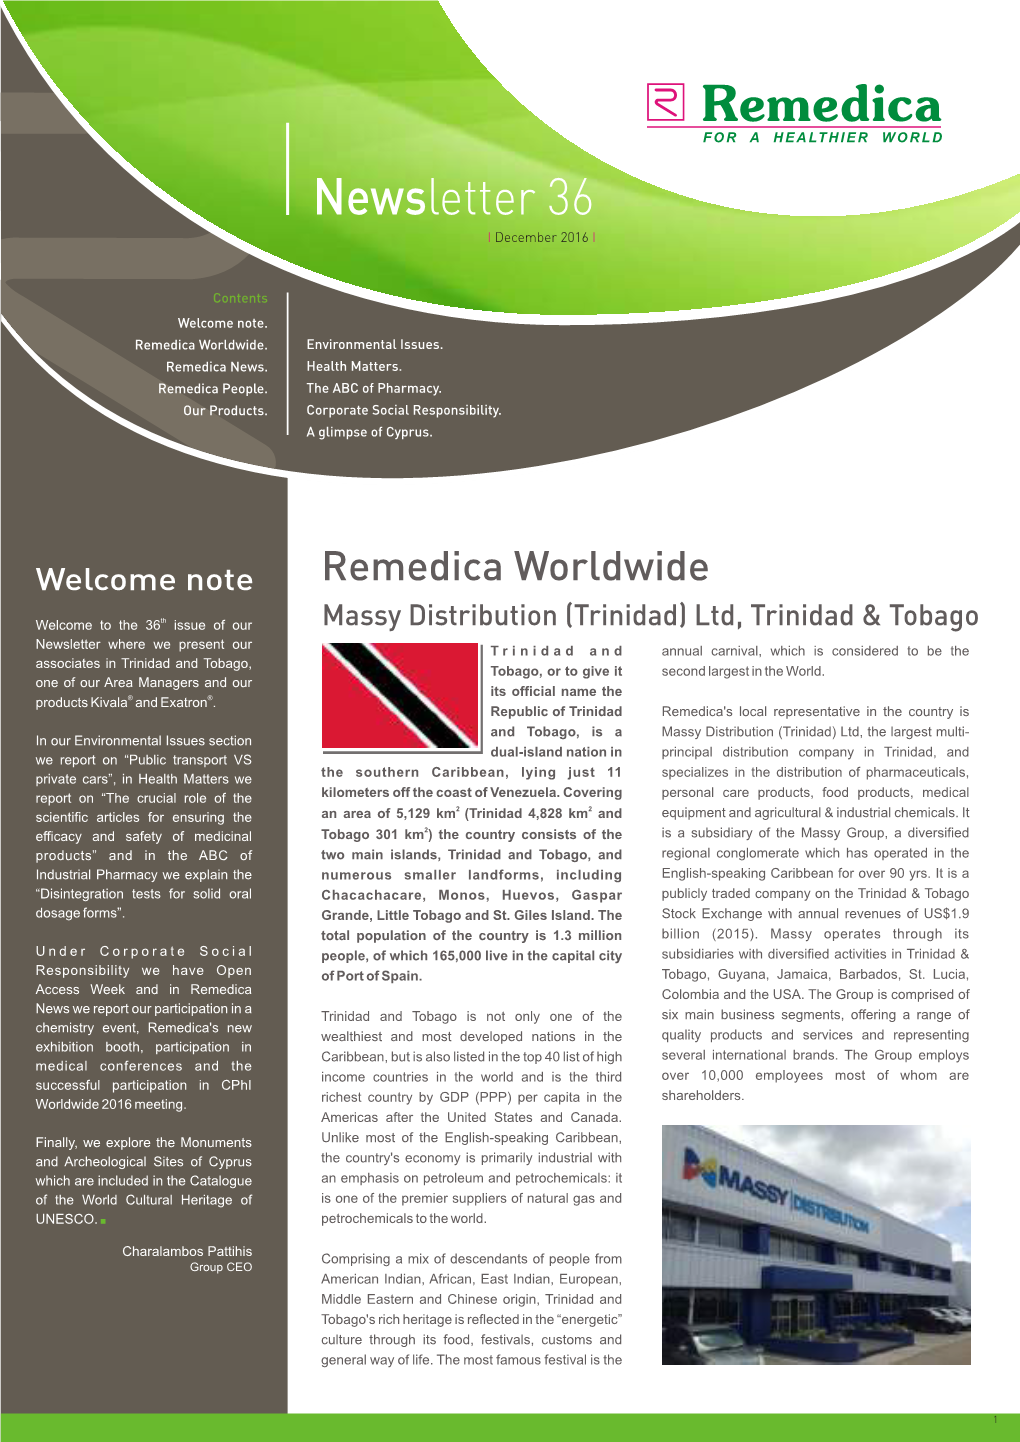 REMEDICA NEWSLETTER 36 Eng 2016 for Email